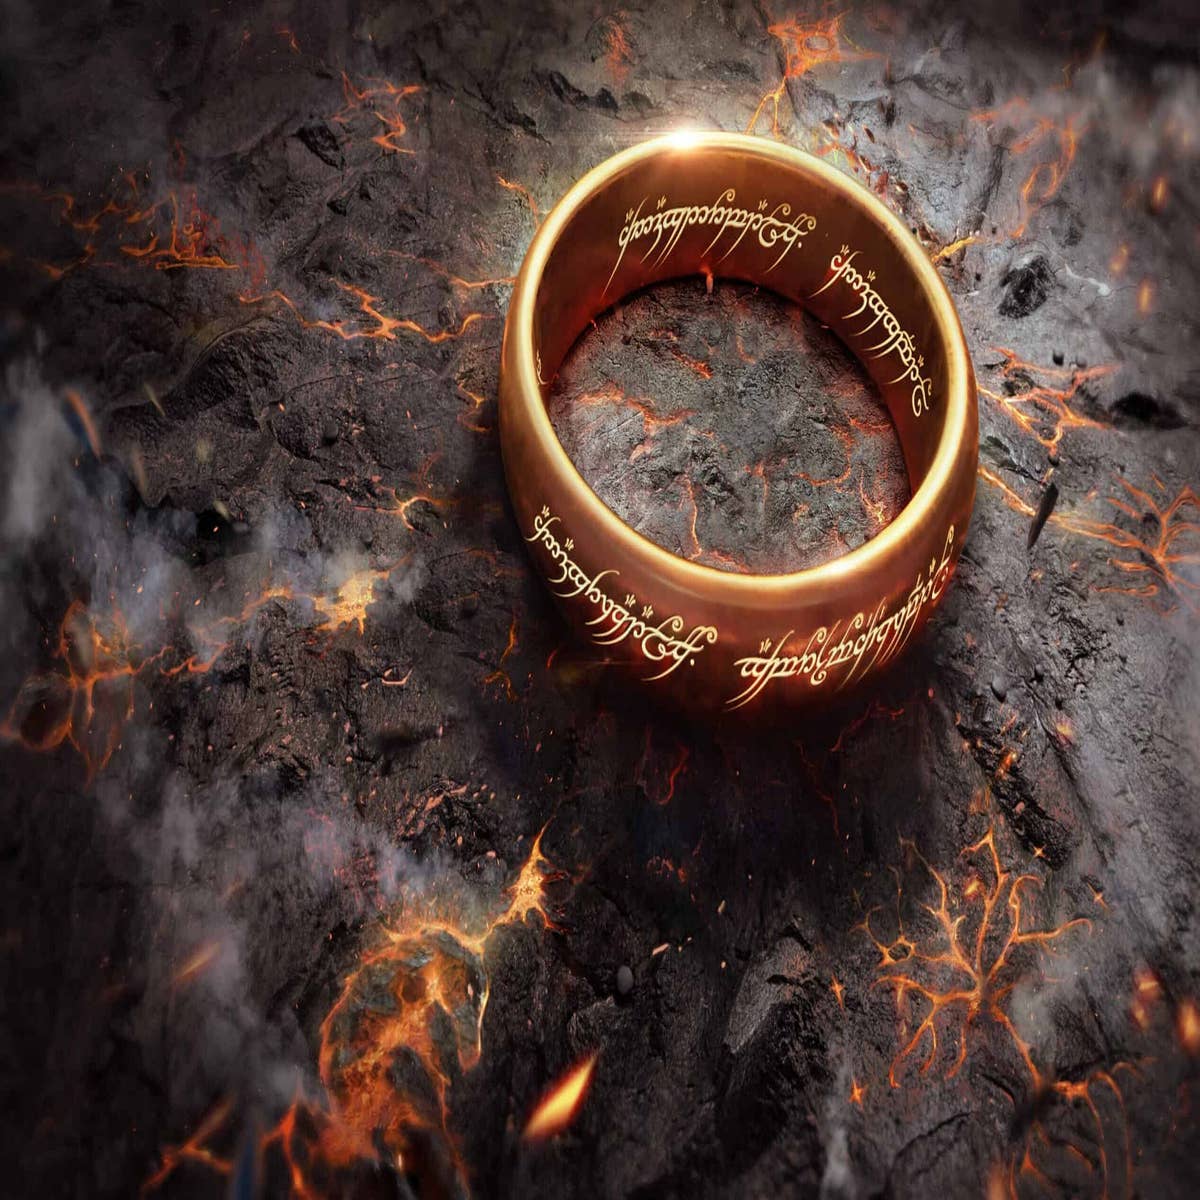 The Lord of the Rings: The Rings of Power Title Announce